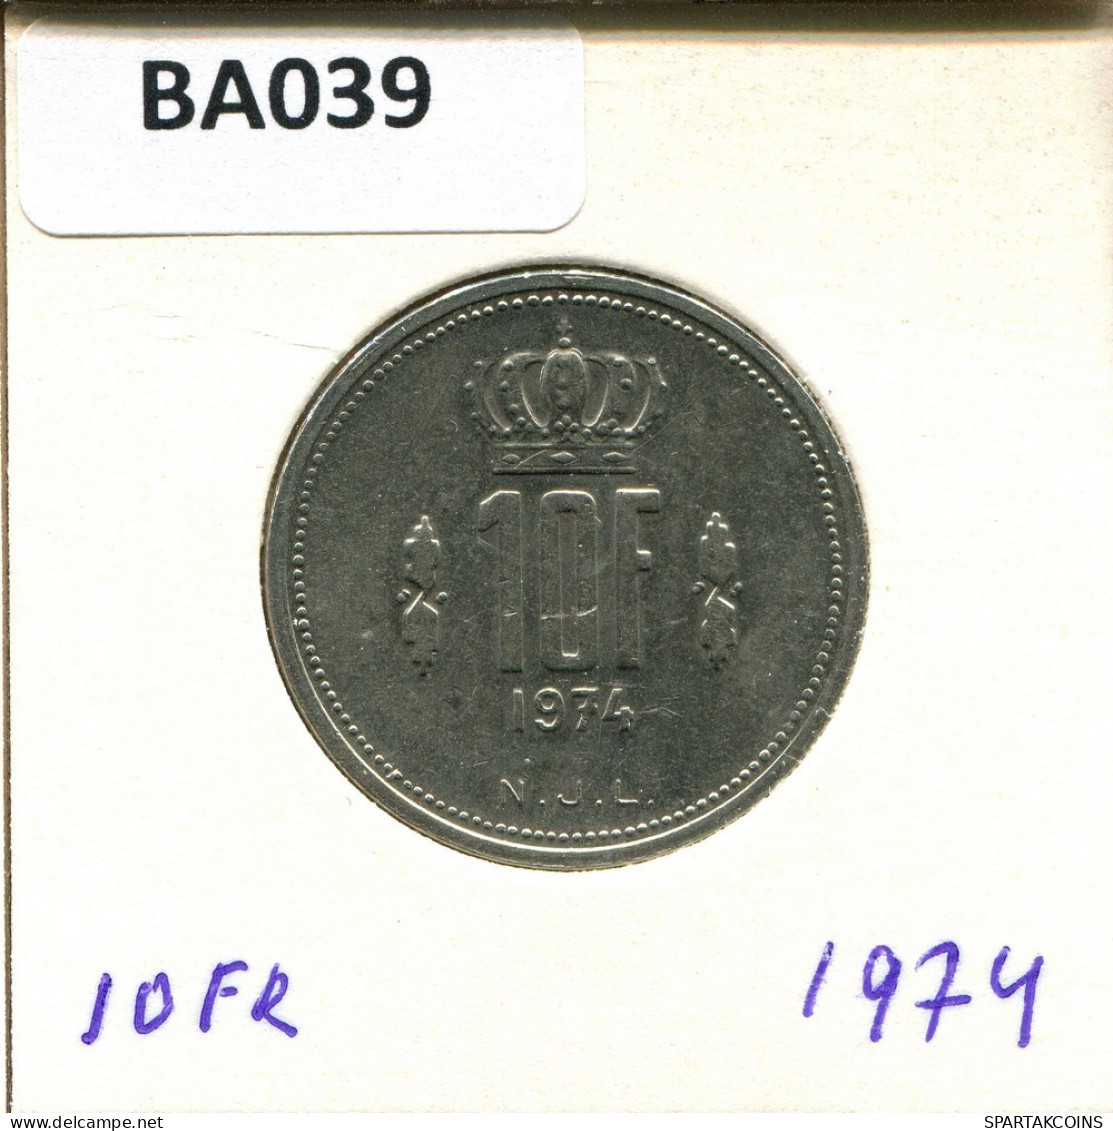 10 FRANCS 1974 LUXEMBOURG Coin #BA039.U.A - Luxemburg